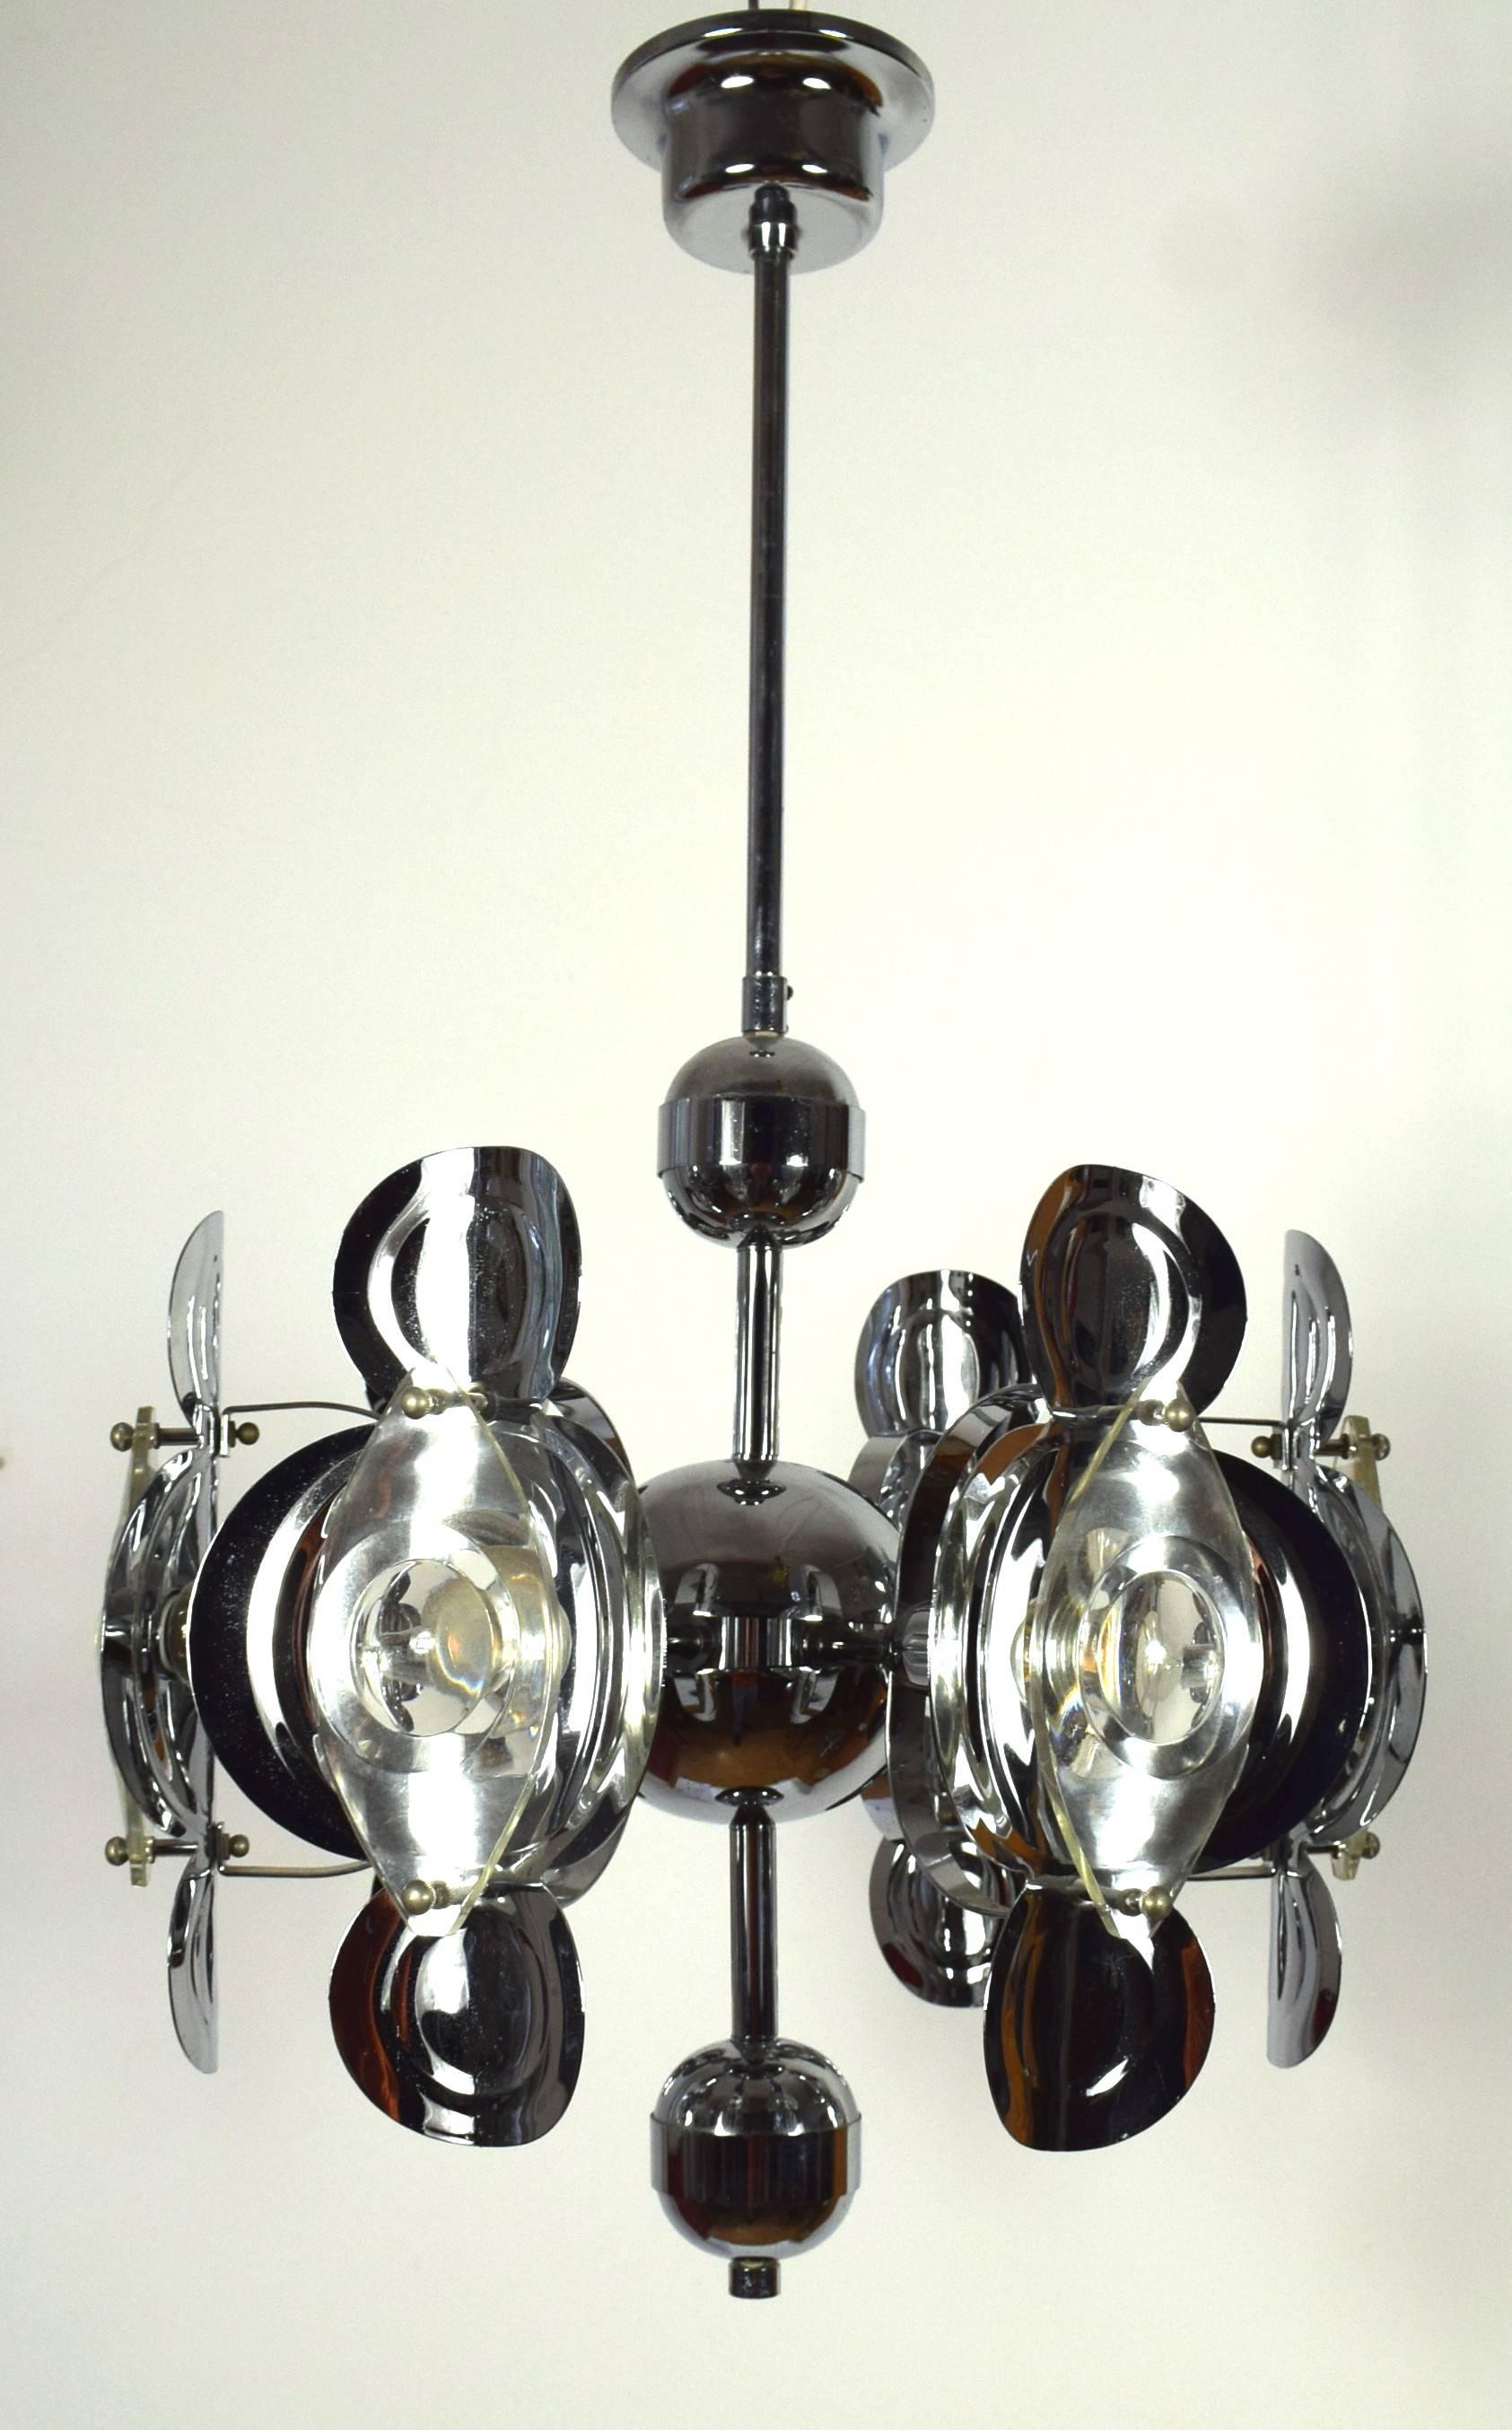 Italian, Mid-Century Gaetano Sciolari chandelier featuring a Sputnik frame and stepped canopy in the original chrome finish. Arge optic glass lenses are decoratively and functionally mounted on unusually shaped concave metal shields to serve as